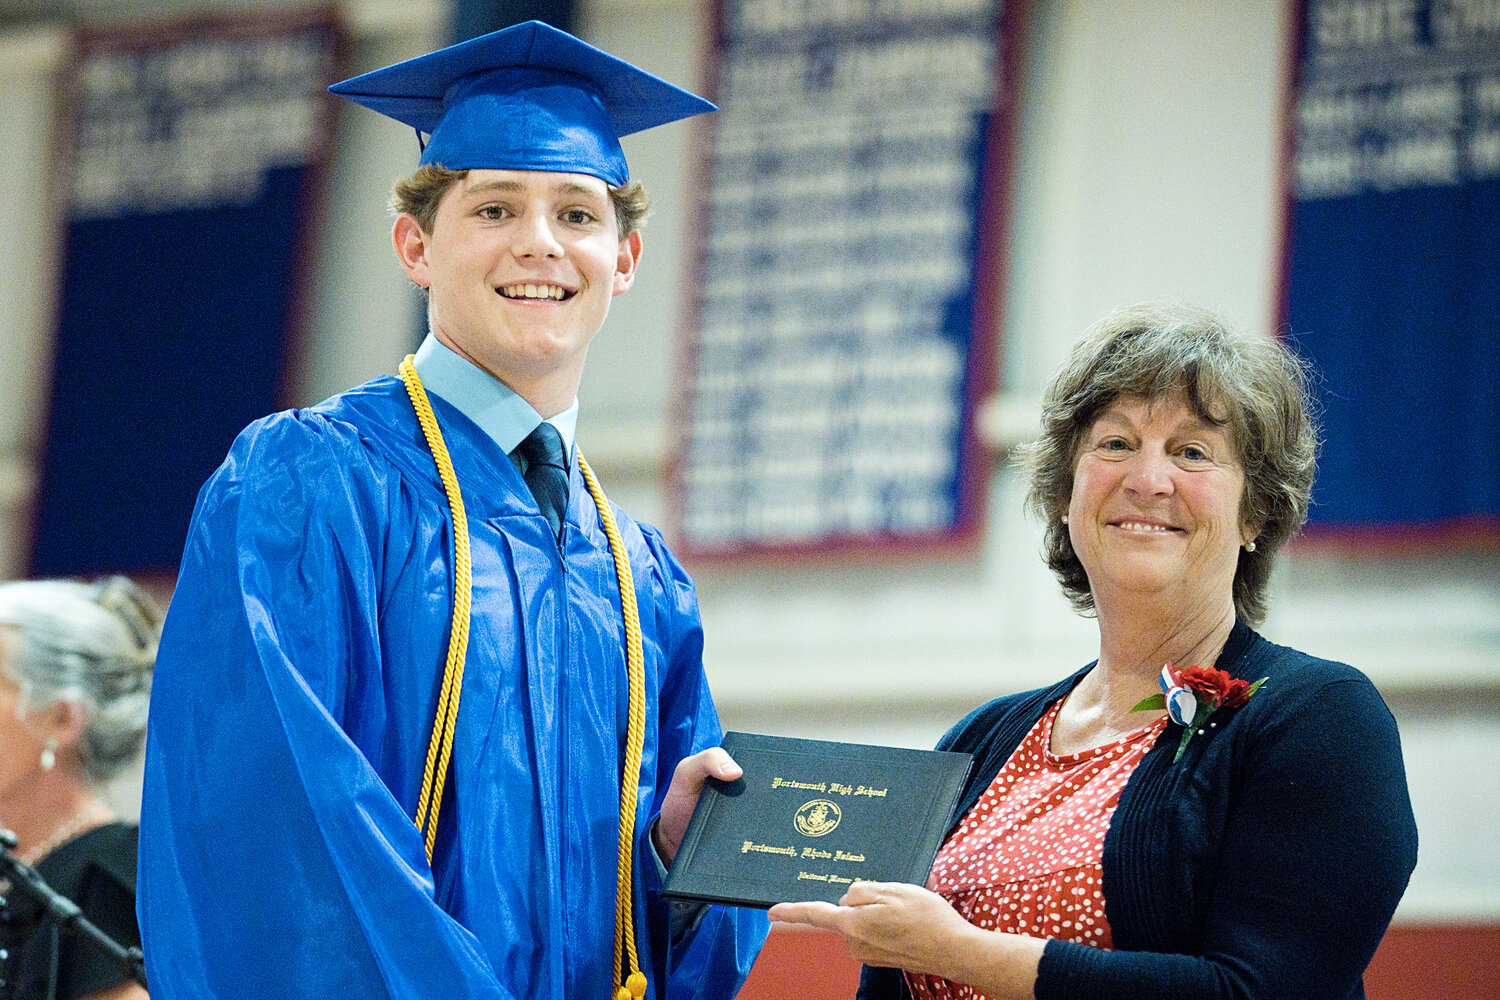 Evan Tullson of Little Compton receives his diploma from Emily Copeland, who chairs the Portsmouth School Committee.